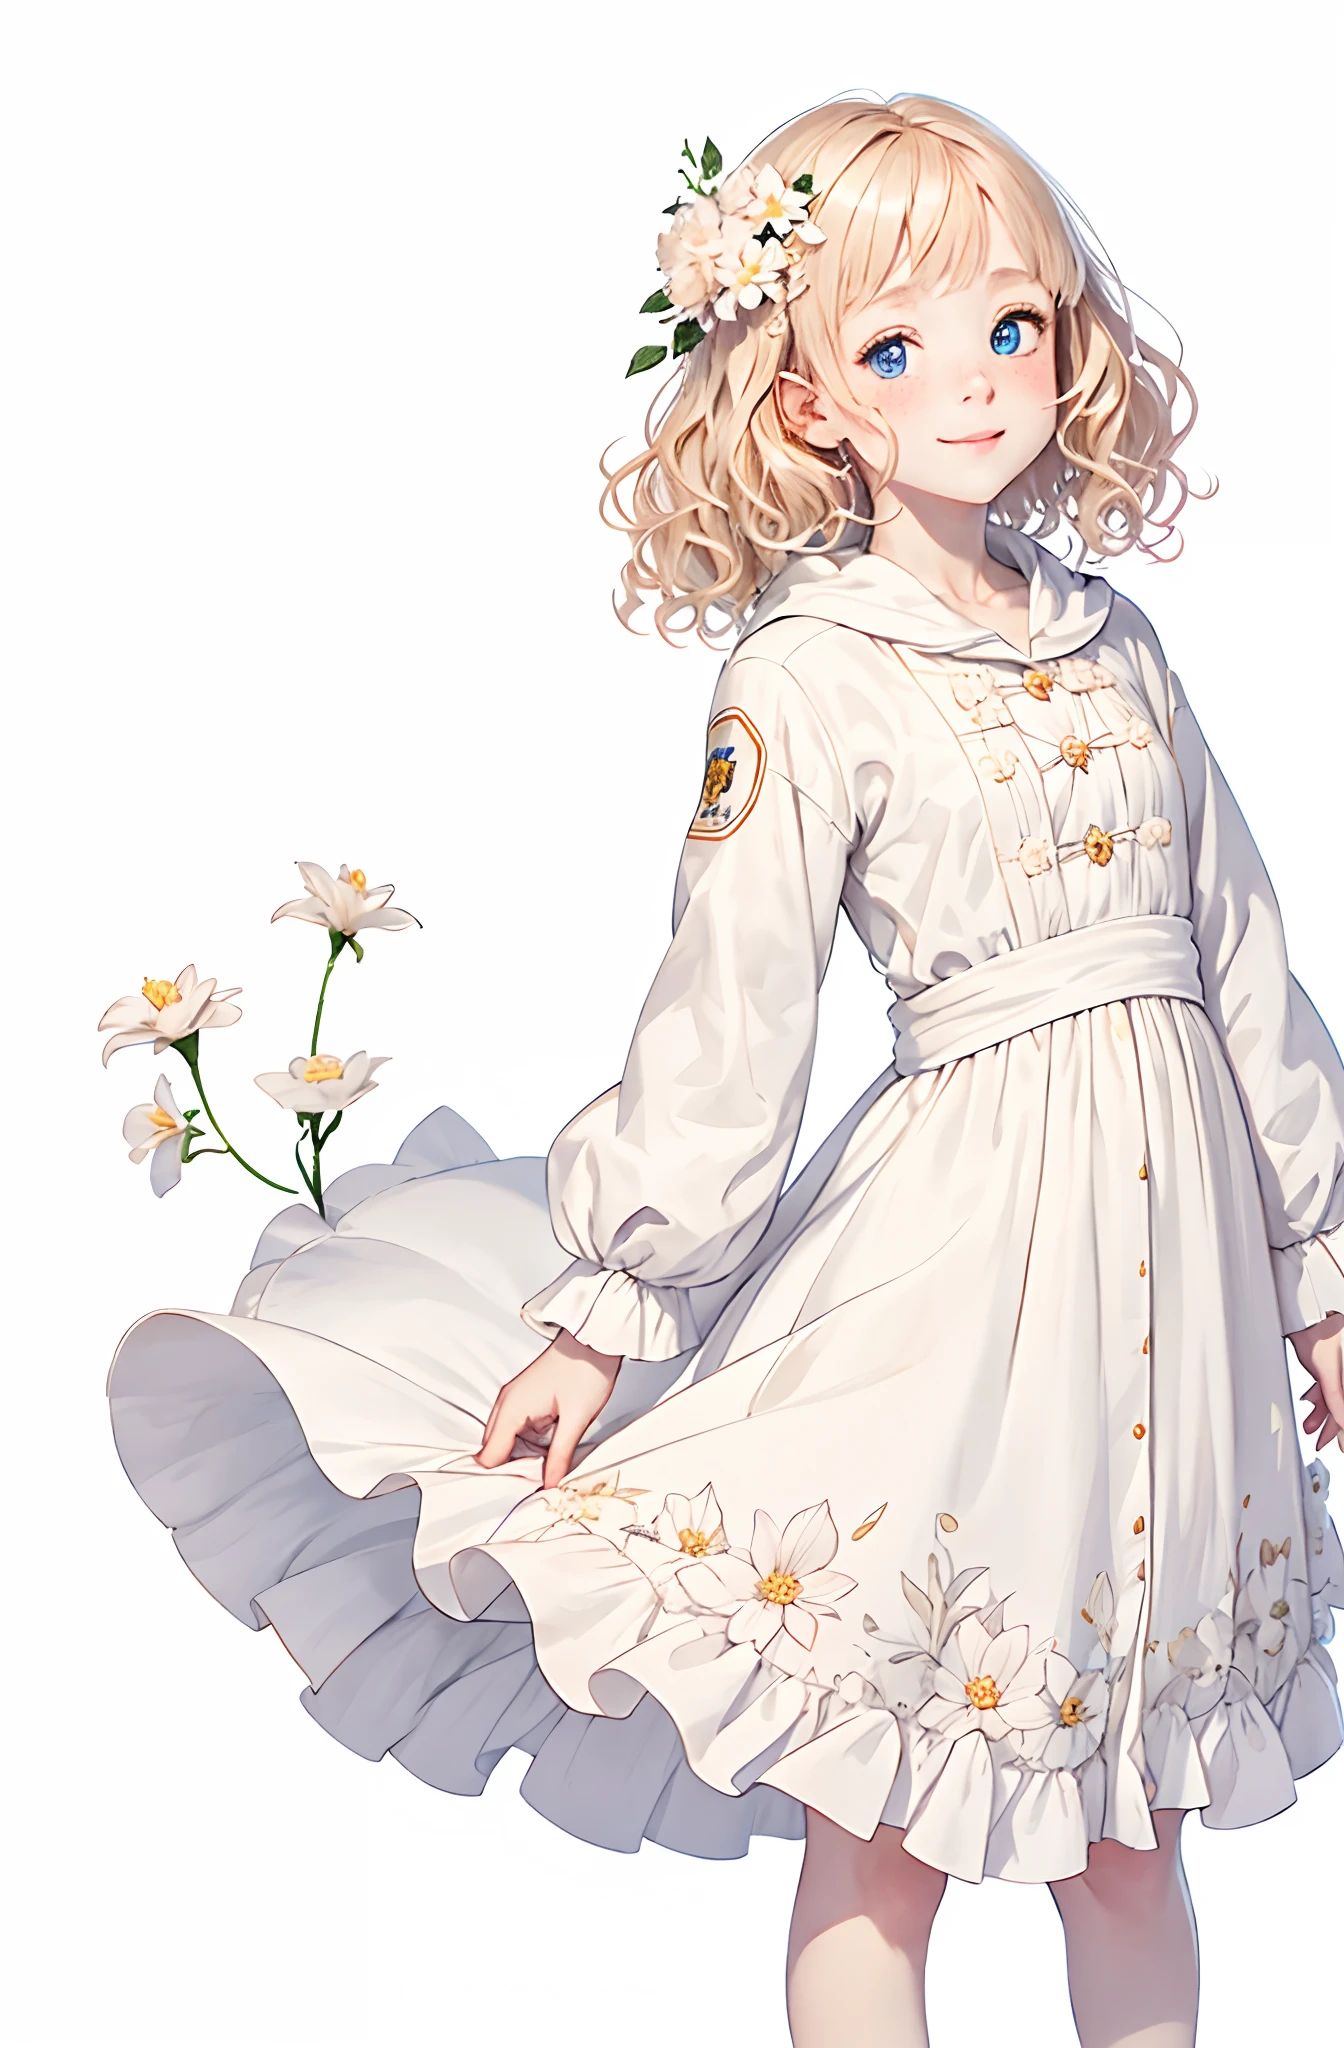 highest quality, pale skin, (face and eyes detail: 1.2), 1 girl, very delicate and beautiful girl, light blond, wavy short hair, blue eyes, snub nose, (slightly childish appearance), ((very beautiful)), (freckles: 0.4), curls, whole body, smile, happy, with white flowers, coat, white background, white world, she is standing, background is white, cute anime girl portraits, anime visual of a cute girl, anime girl in white dress with flowers in hair, crisp clear rpg portrait, watercolor,